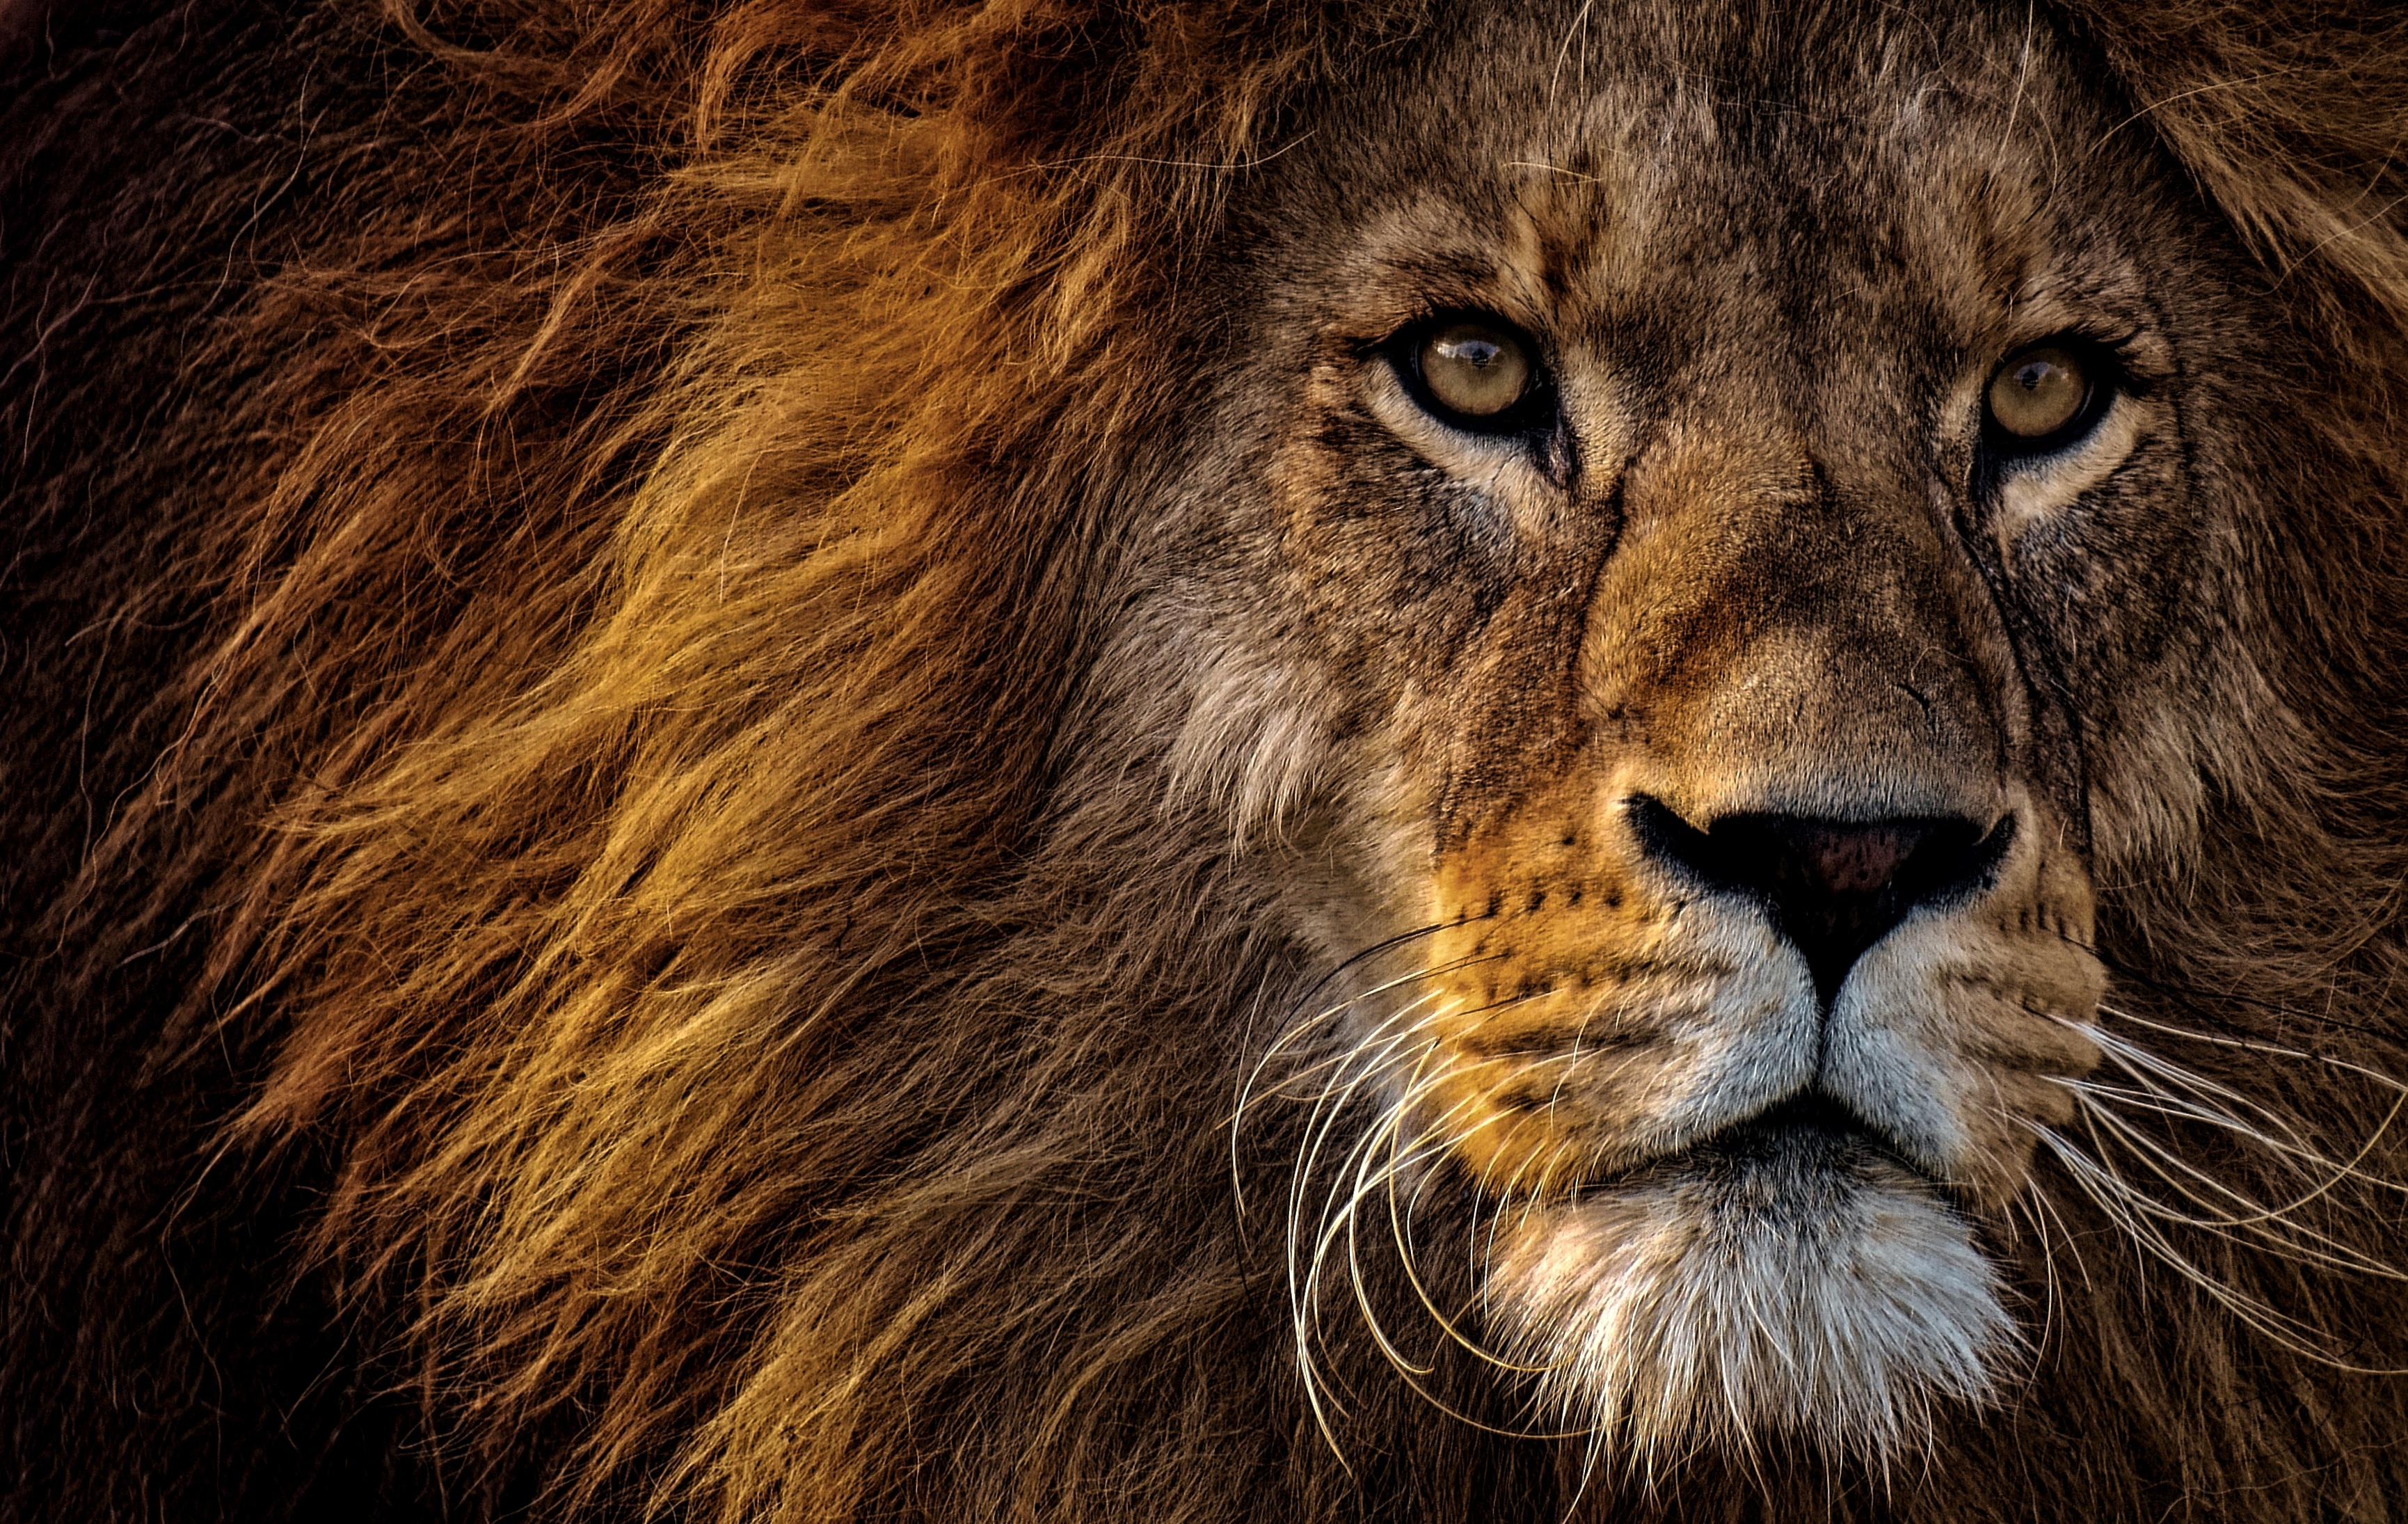 predator, opinion, animals, muzzle, lion, sight, mane, king of beasts, king of the beasts